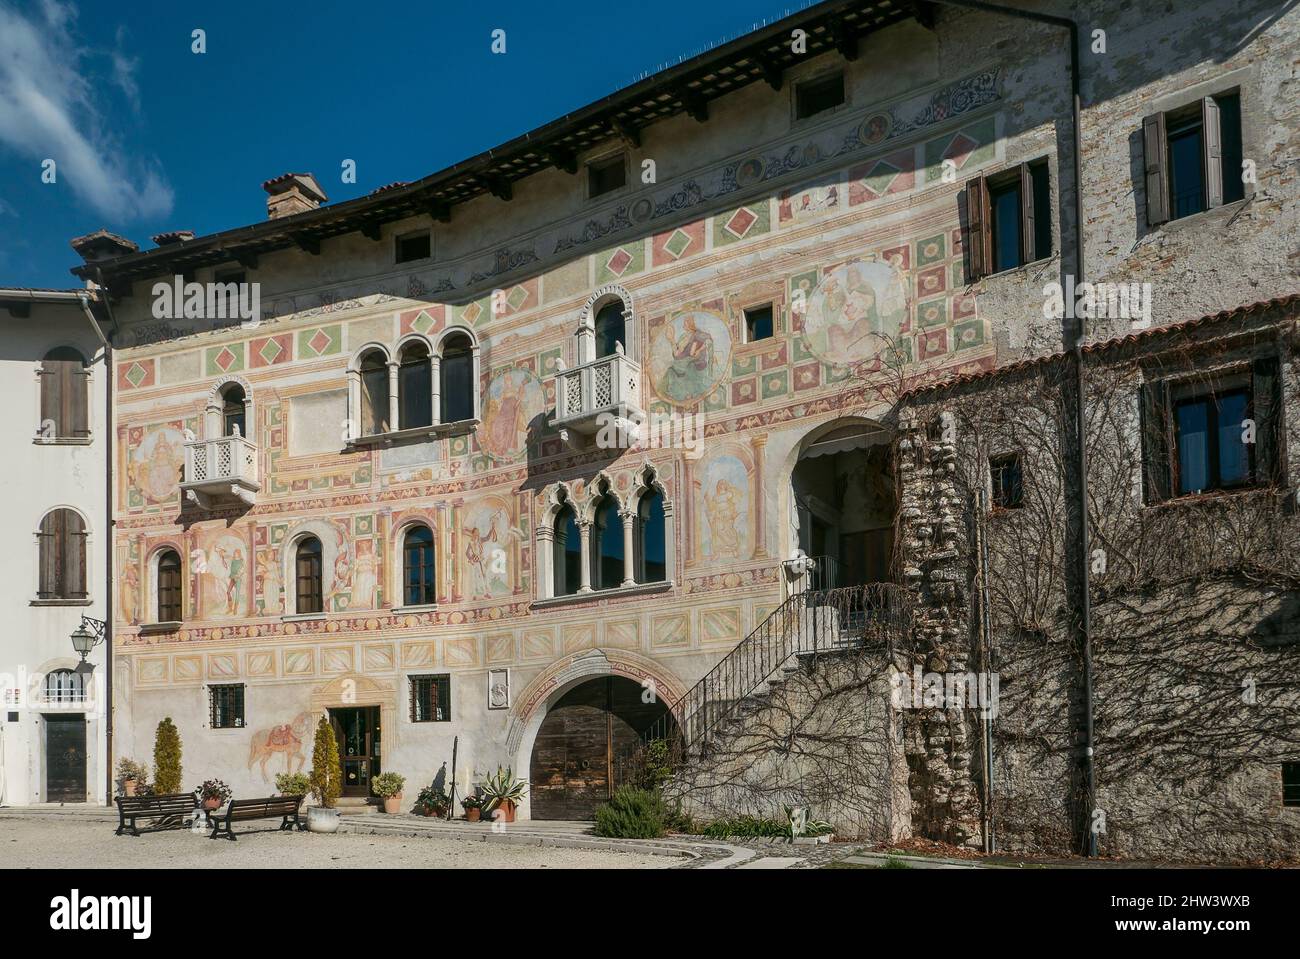 Spilimbergo, Italy (26th February 2022) - The s.c. Palazzo dipinto (Painted palace), a decorated building belonging to the medieval castle Stock Photo